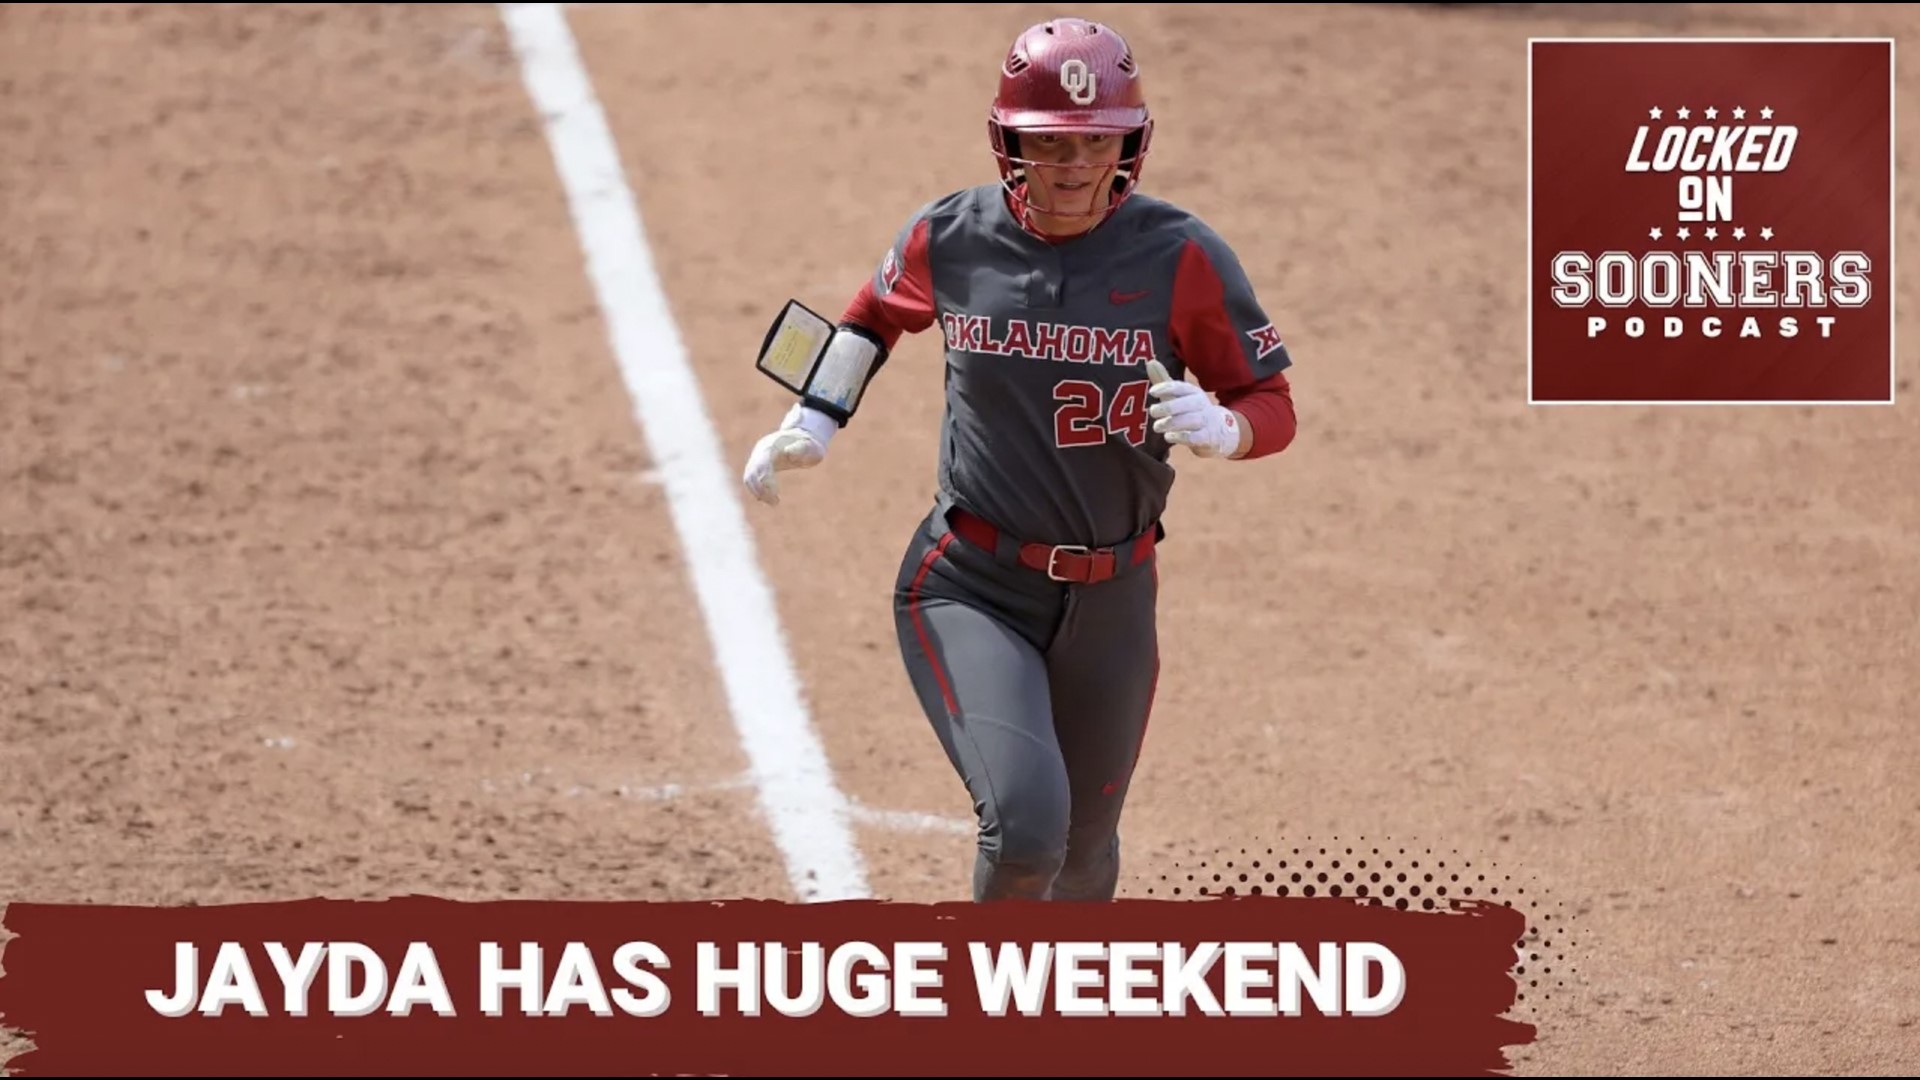 The Oklahoma Sooners had a great weekend in Lawrence, sweeping the Kansas Jayhawks behind an impressive start in the opener from Kelly Maxwell.